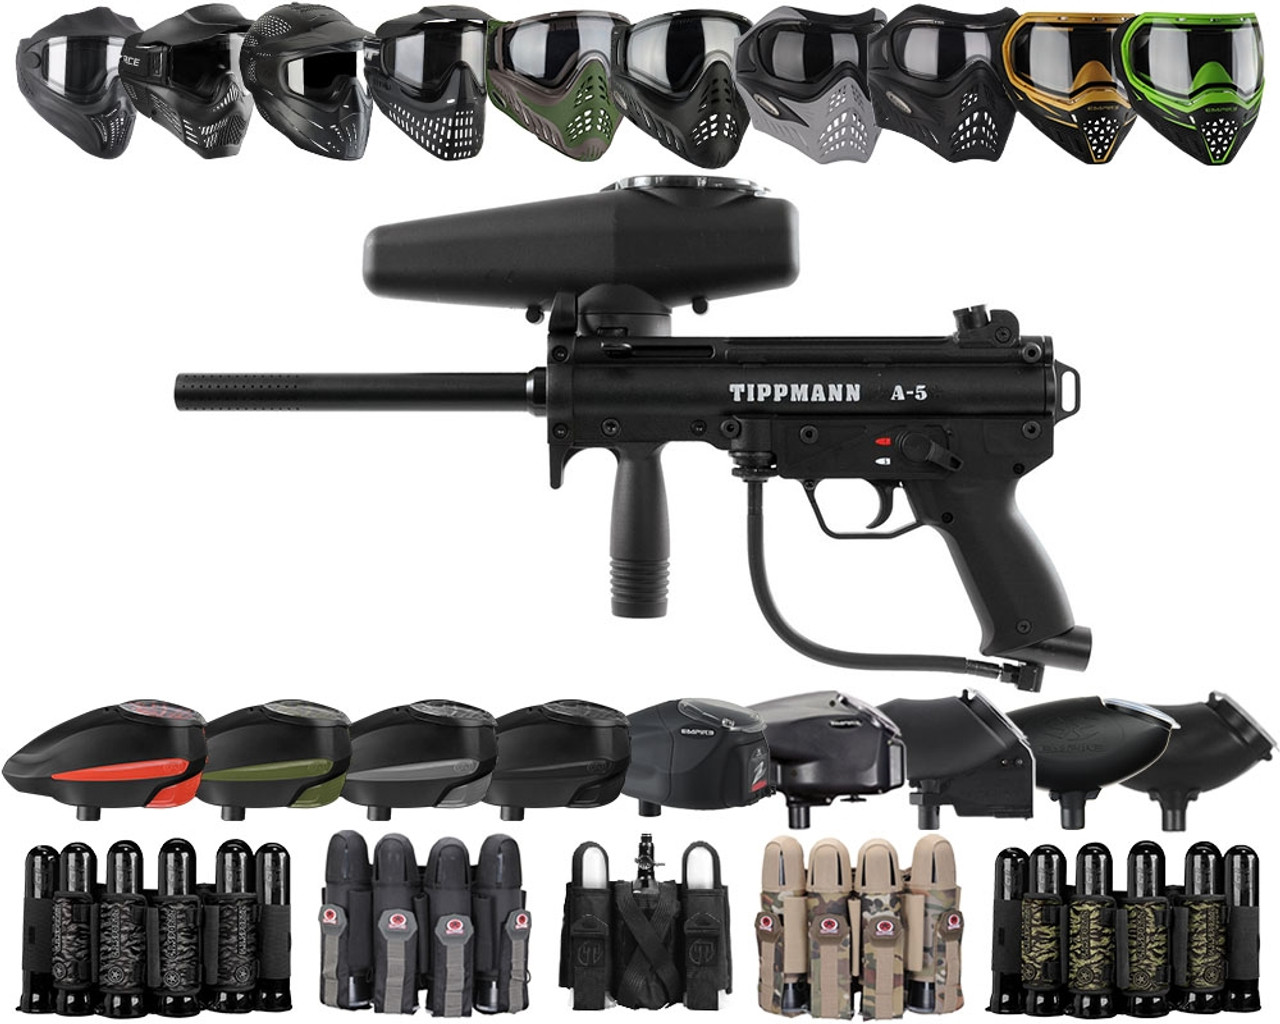 Tippmann A5 Paintball Marker Gun with the Cyclone Feed System